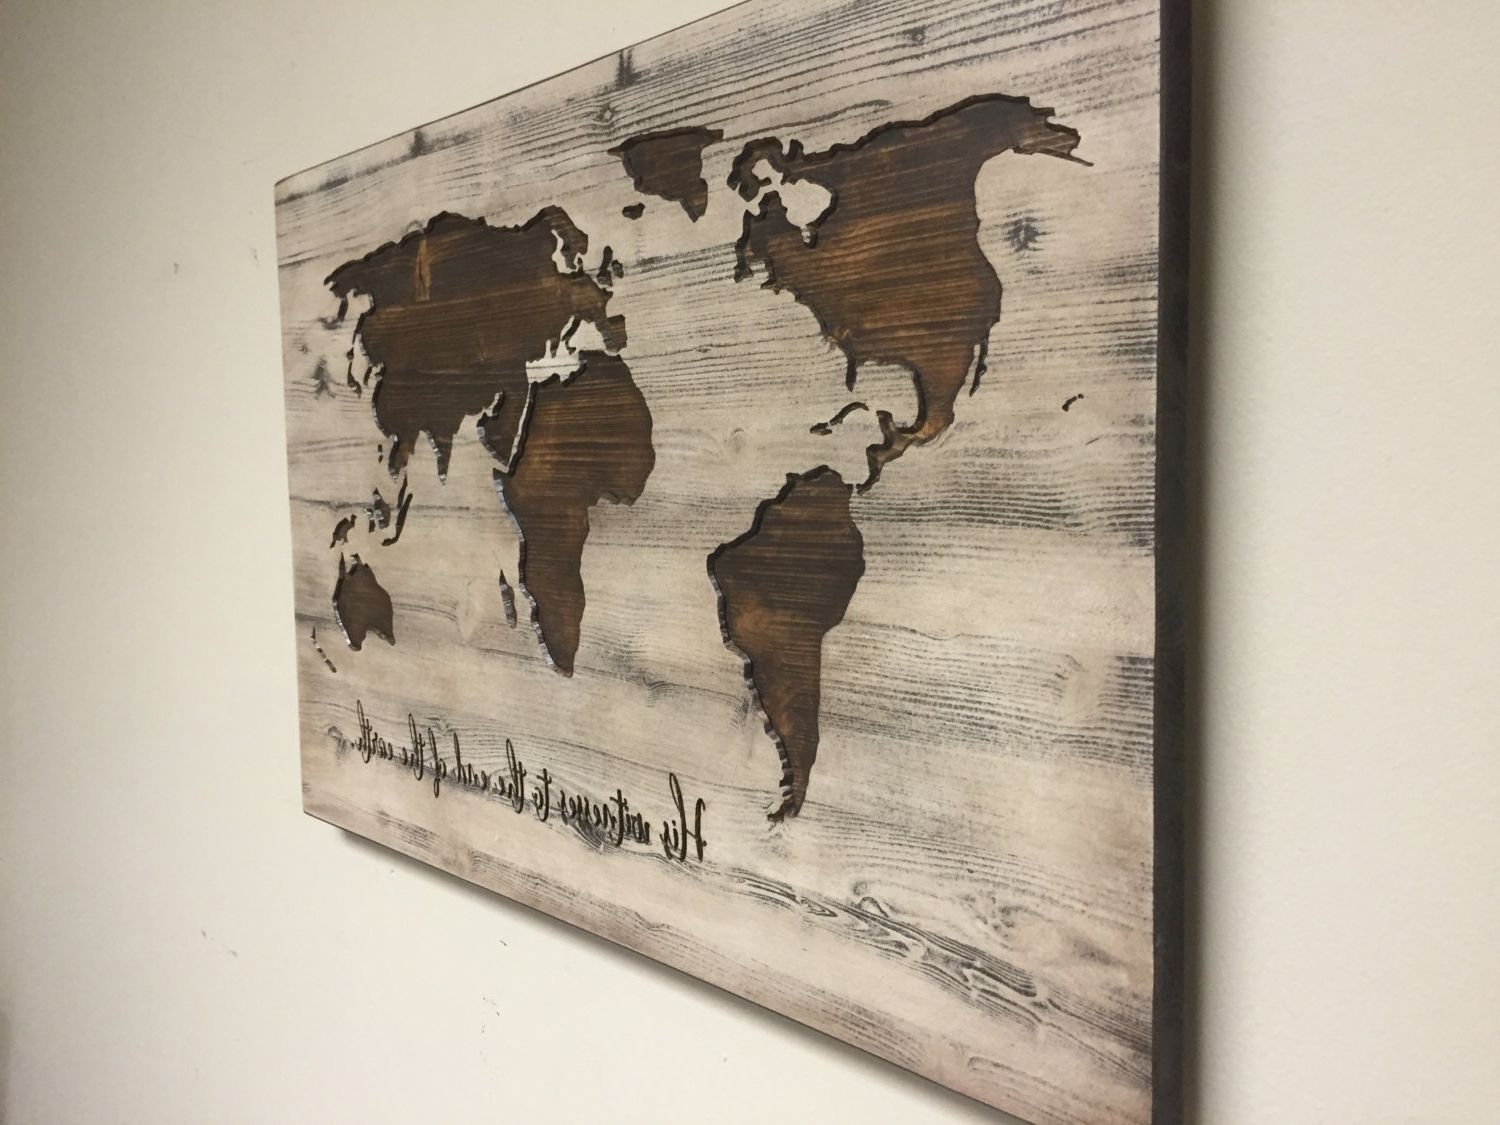 Framed World Map Wall Art Inside Well Known World Map Wall Art Spiritual Vintage Carved Wood His With (View 9 of 15)